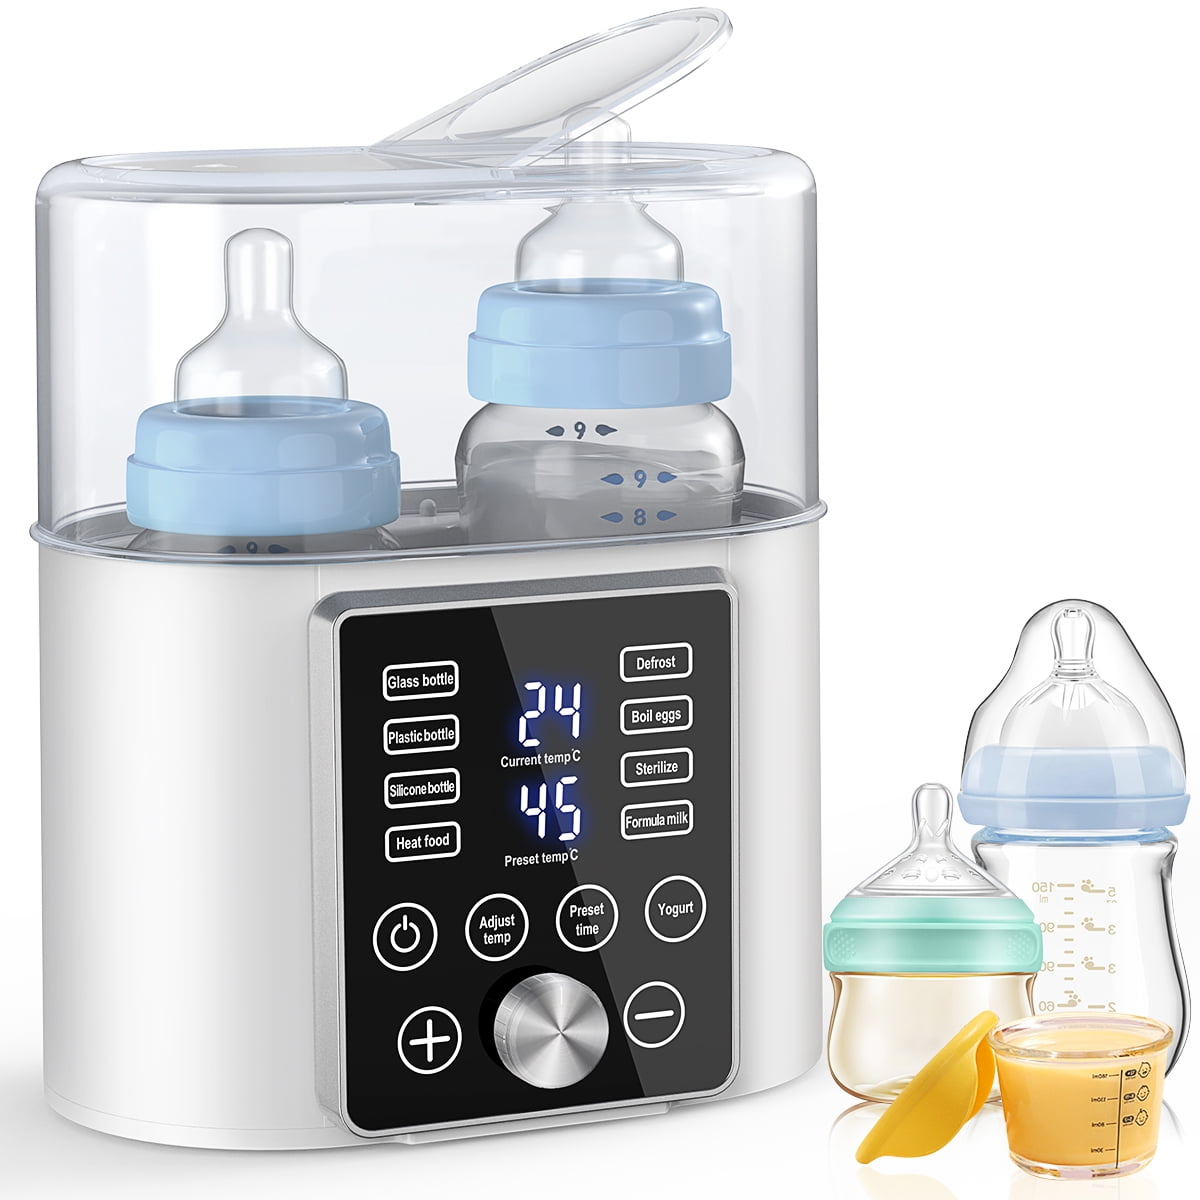 The First Years Baby Bottle Warmer And Sterilizer - Pacifier And